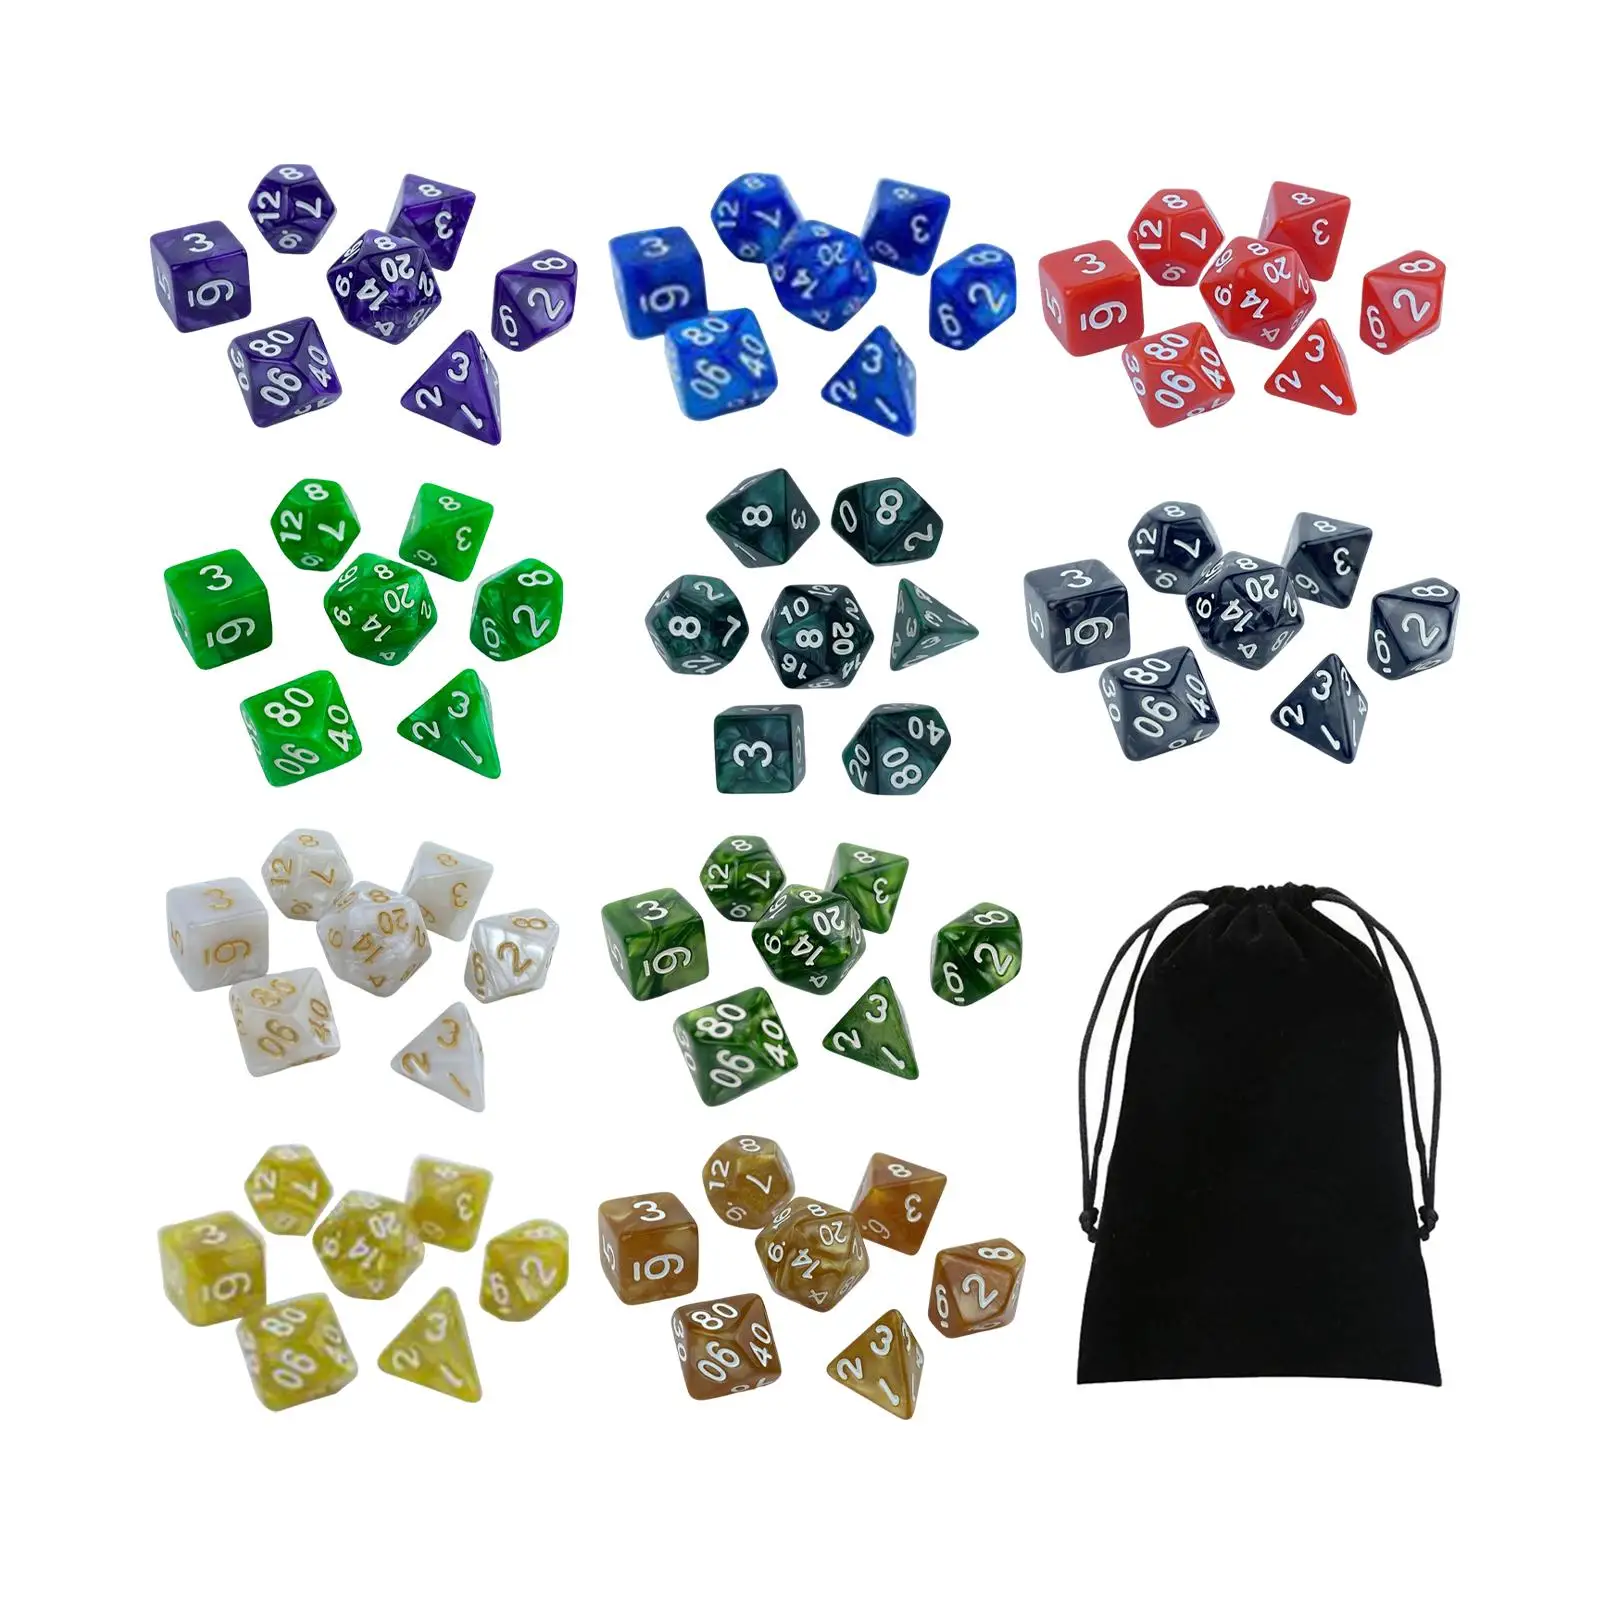 70 Pieces Polyhedral Dice Entertainment Toy with Storage Bag Game Props Polyhedral Dice Set Dice for D6 D10 D8 D12 D4